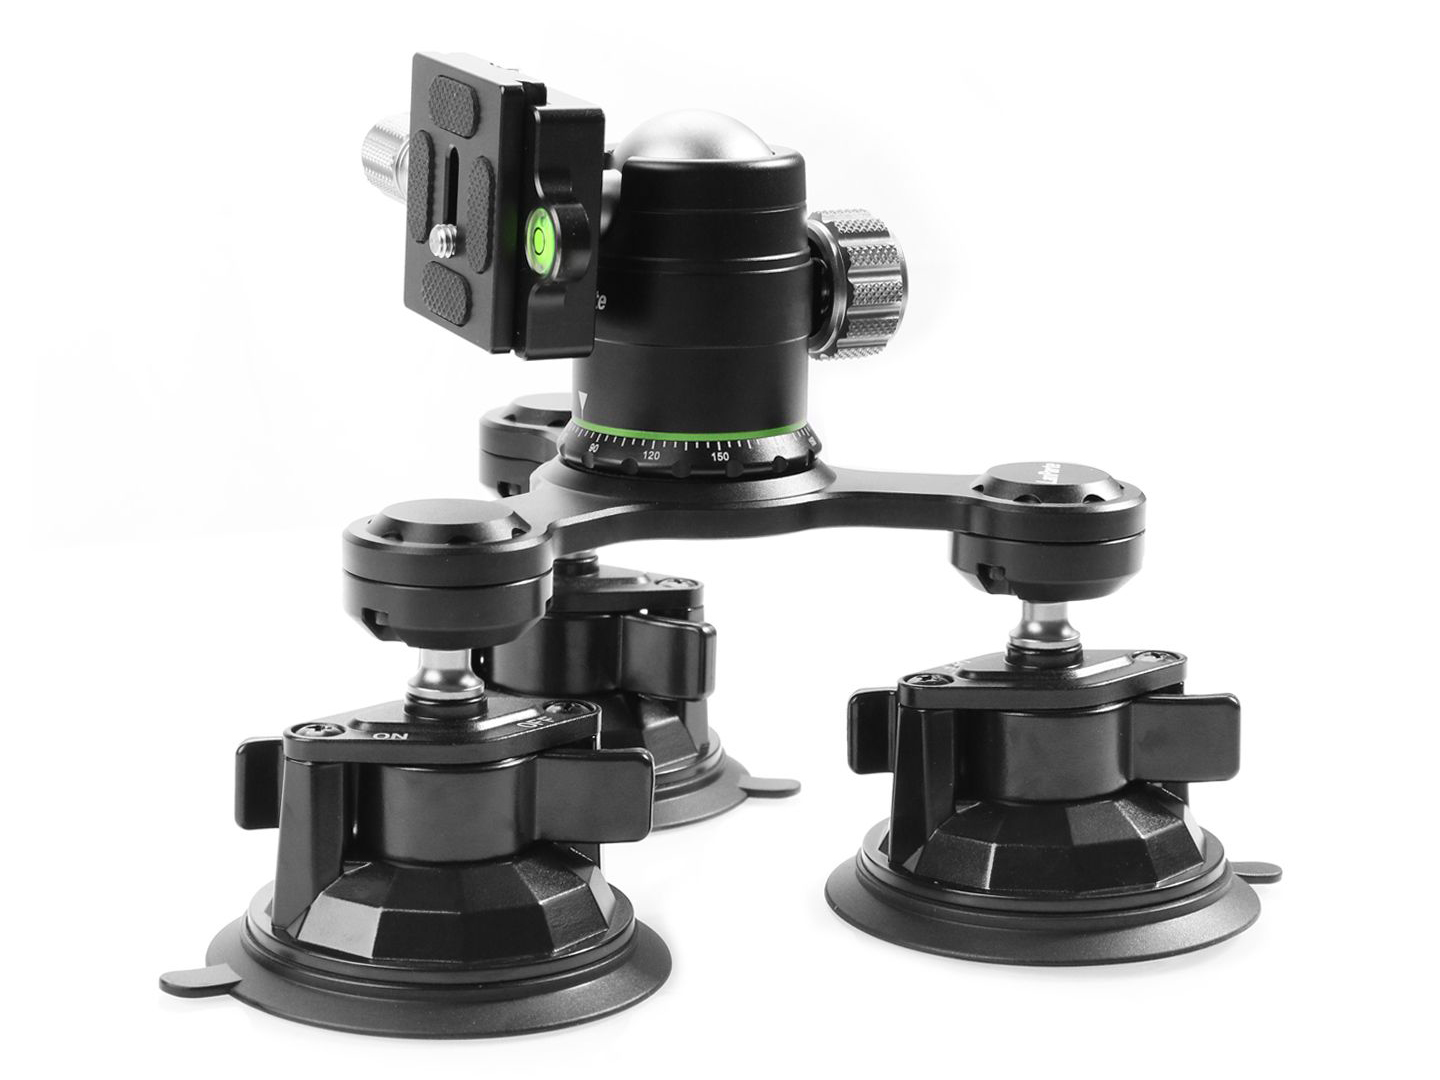 http://suctioncup-mount.com/products/4-2-triple-suction-cup-camera-mount_01.jpg